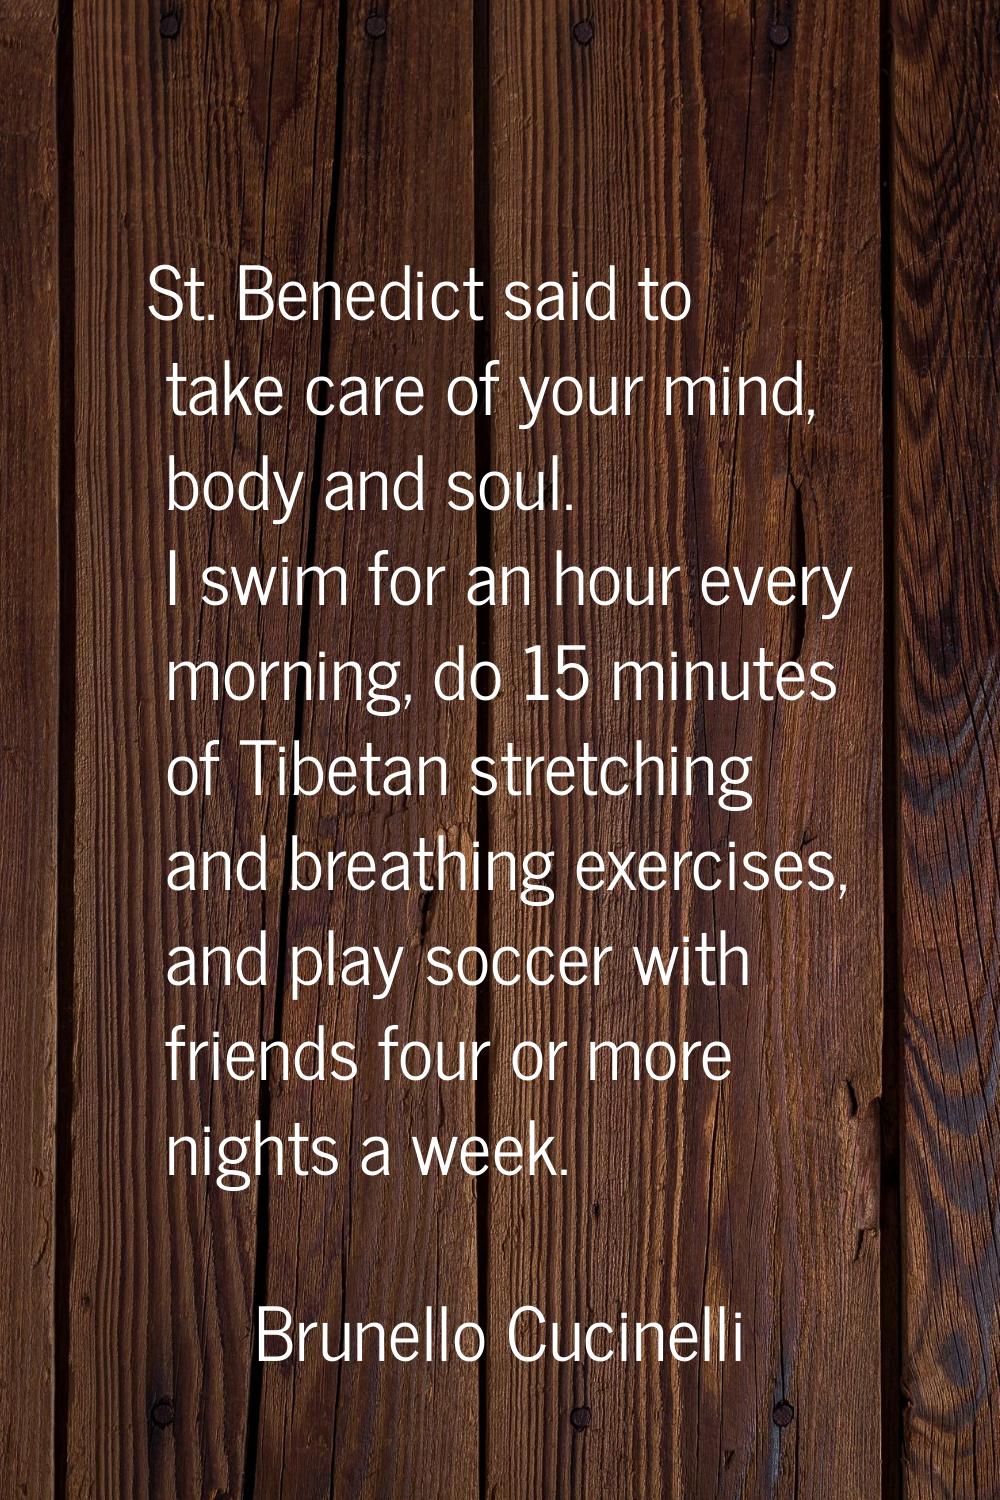 St. Benedict said to take care of your mind, body and soul. I swim for an hour every morning, do 15